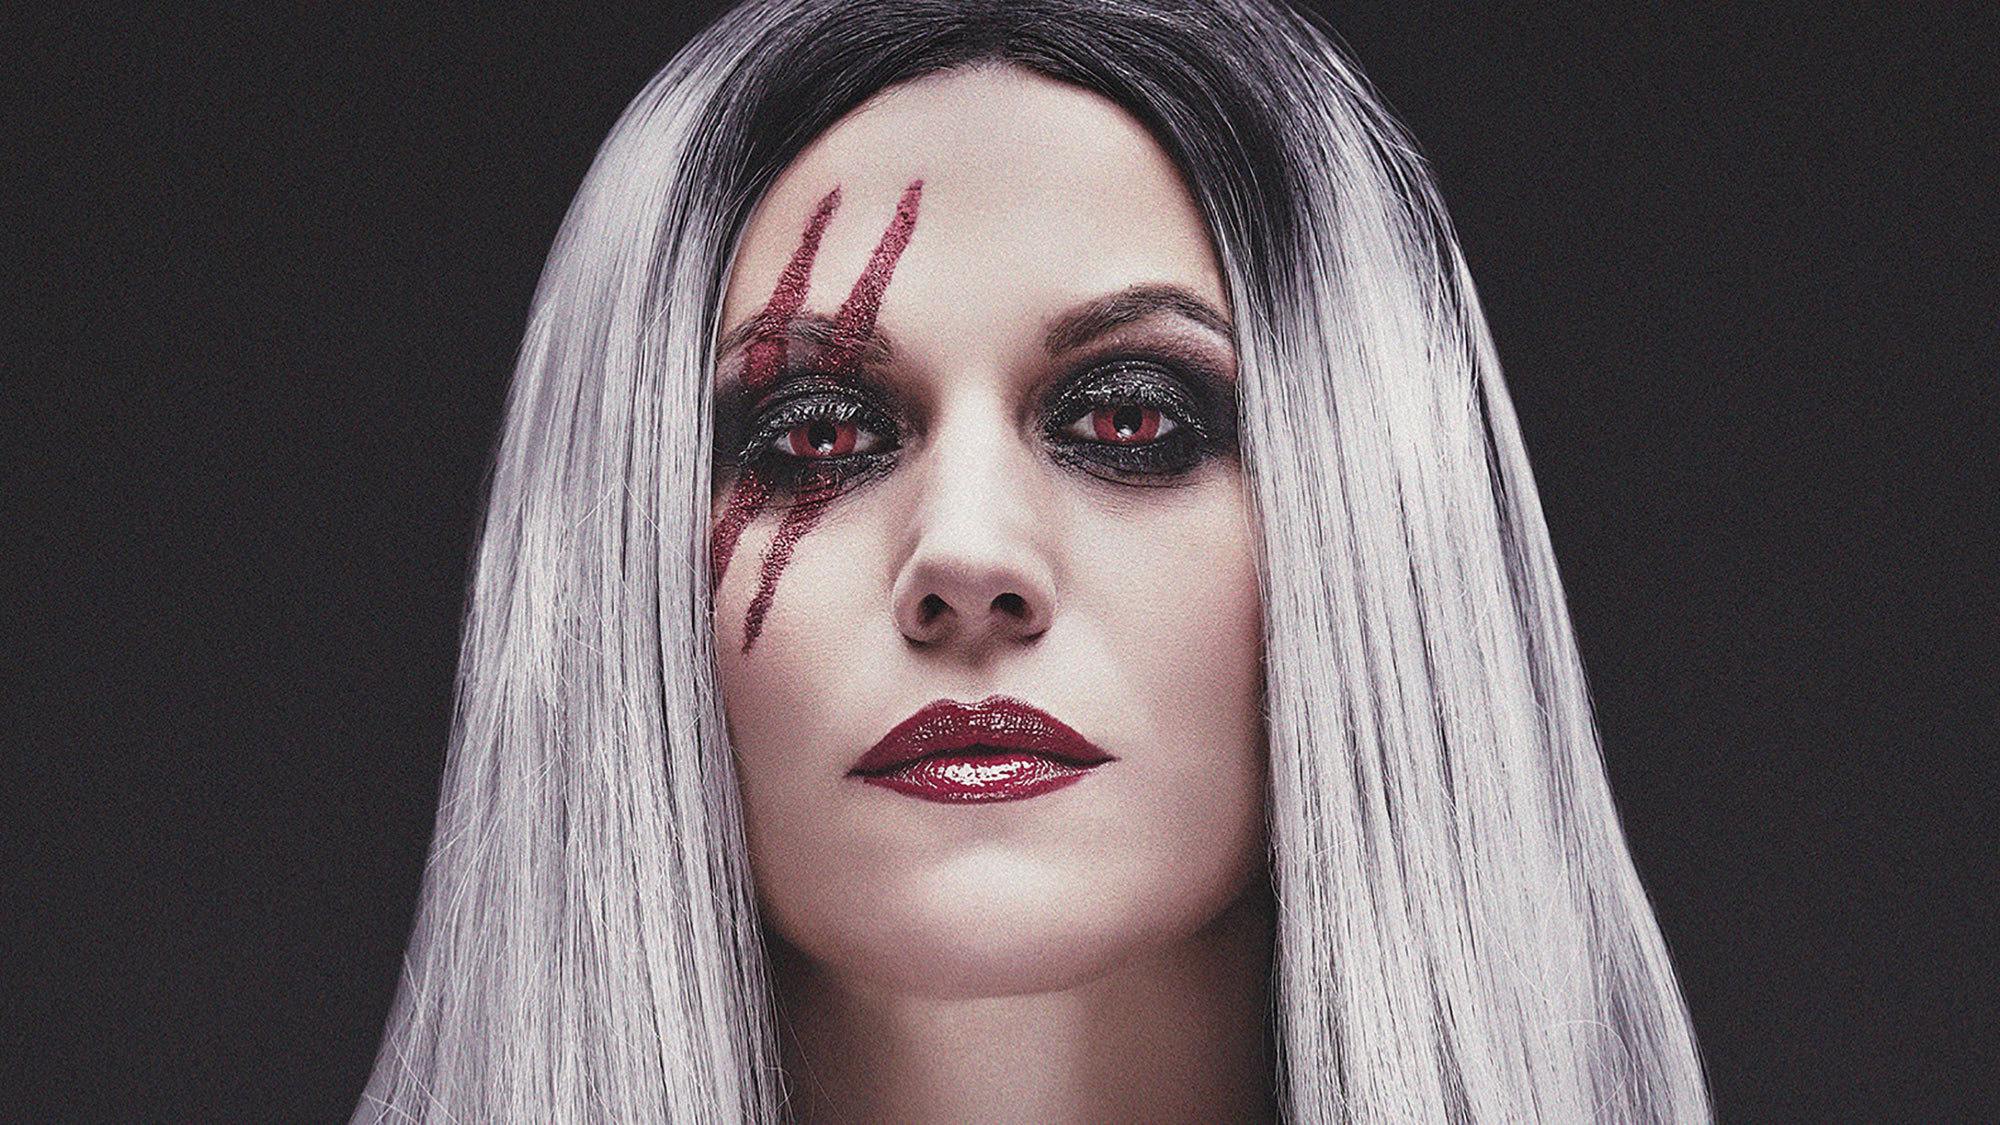 Lacuna Coil's Cristina Scabbia: The 10 Songs That Changed My Life